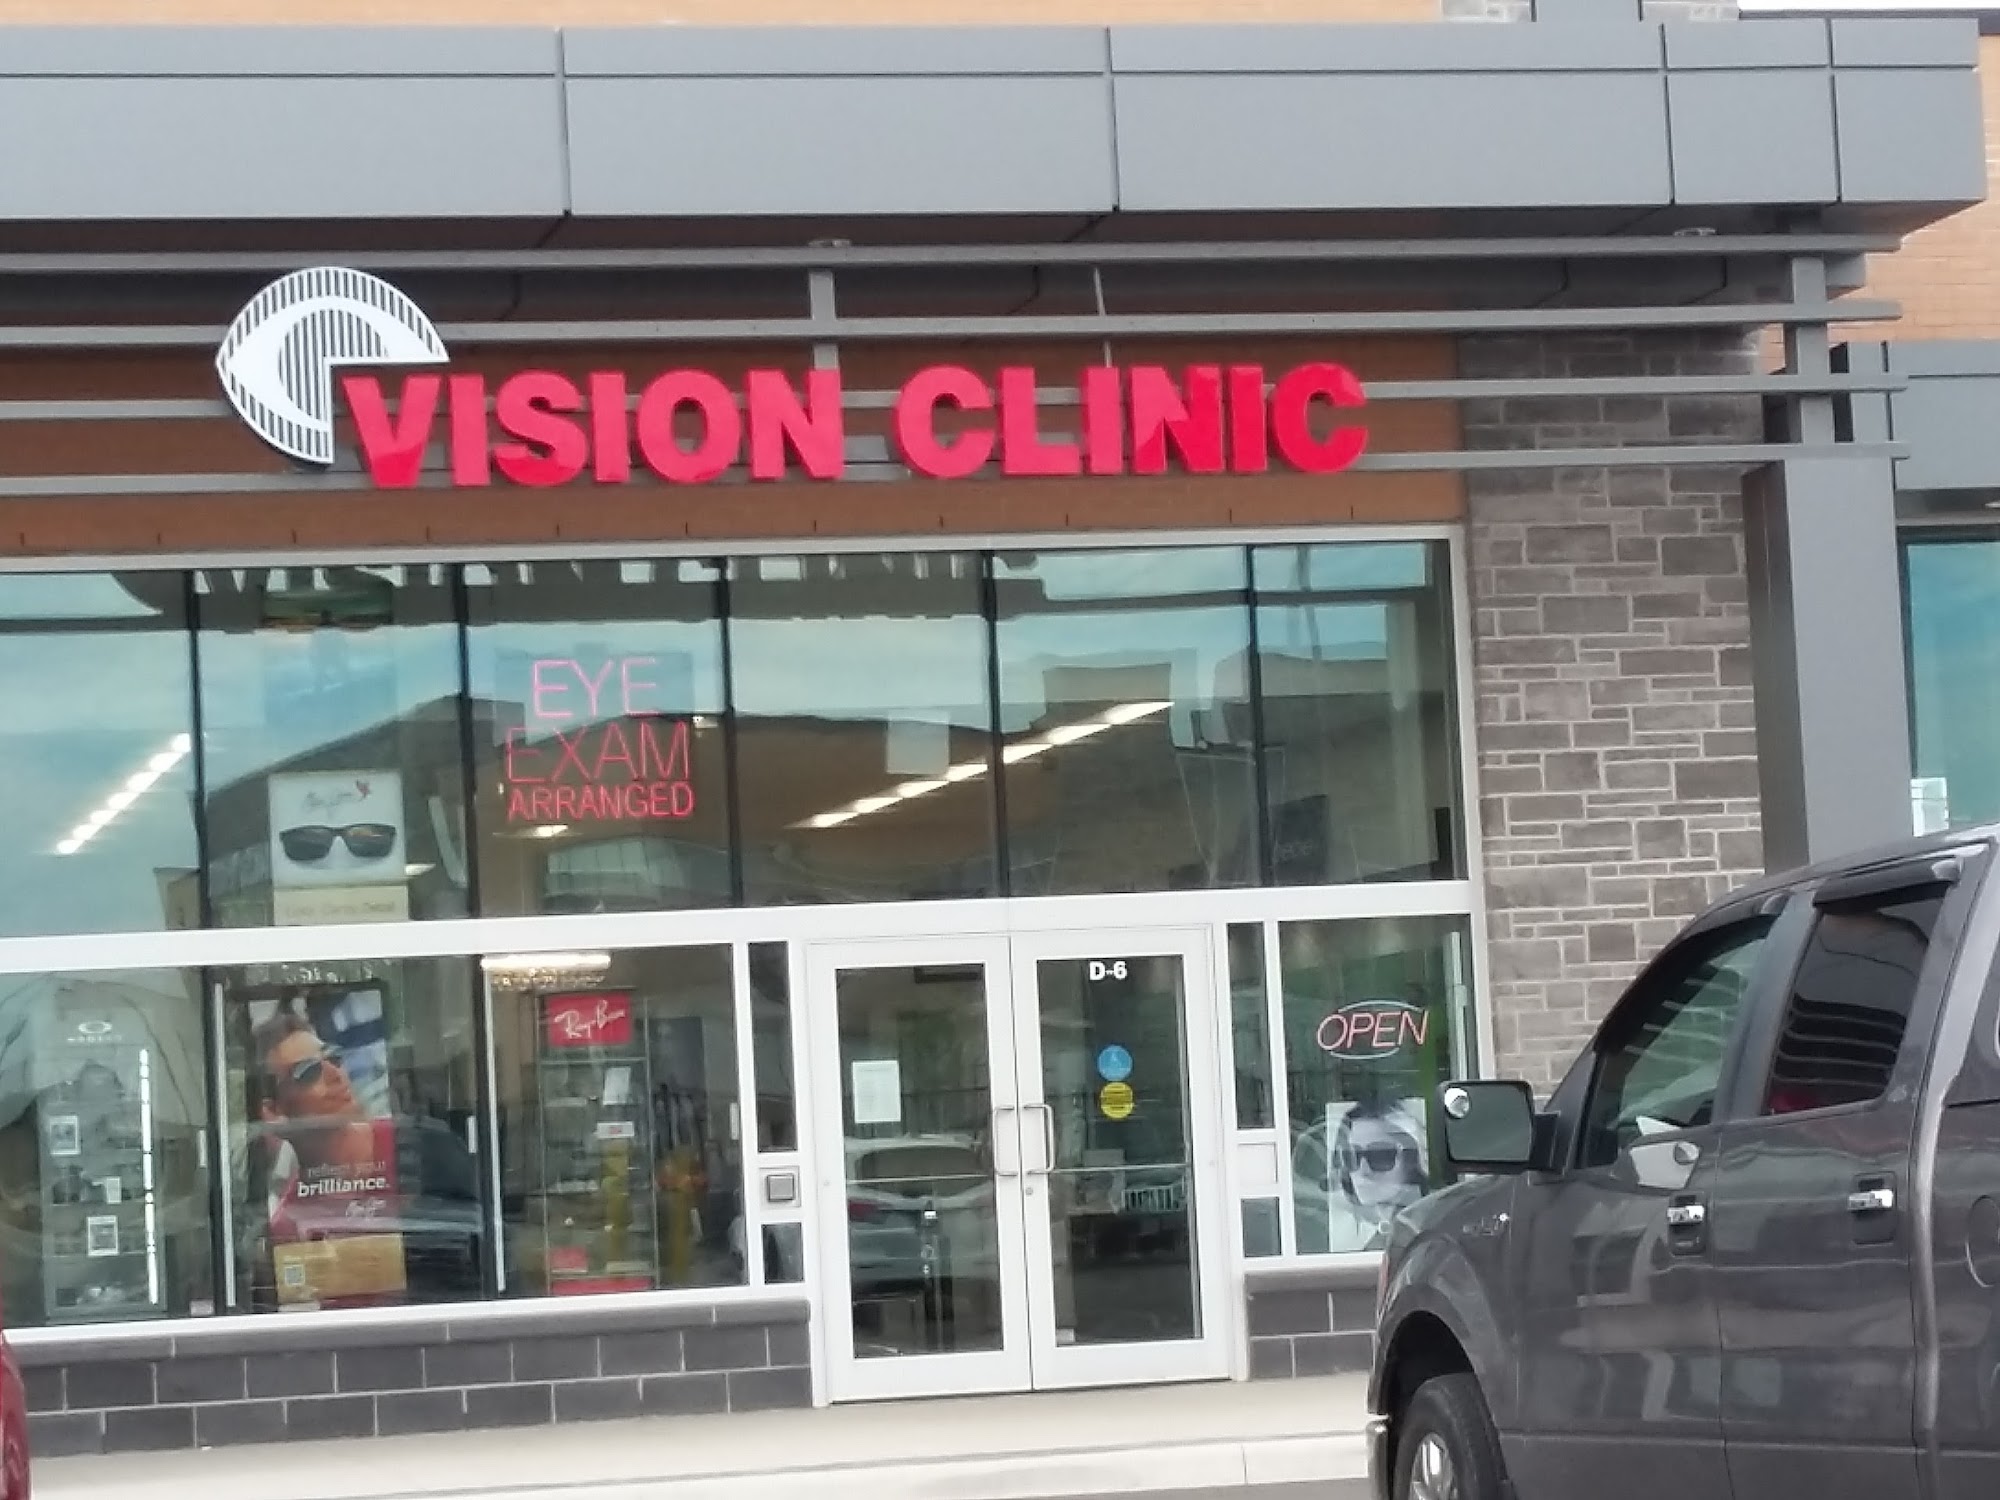 Vision Clinic | Fonthill 130 Hwy 20 E D6, Fonthill Ontario L0S 1E6